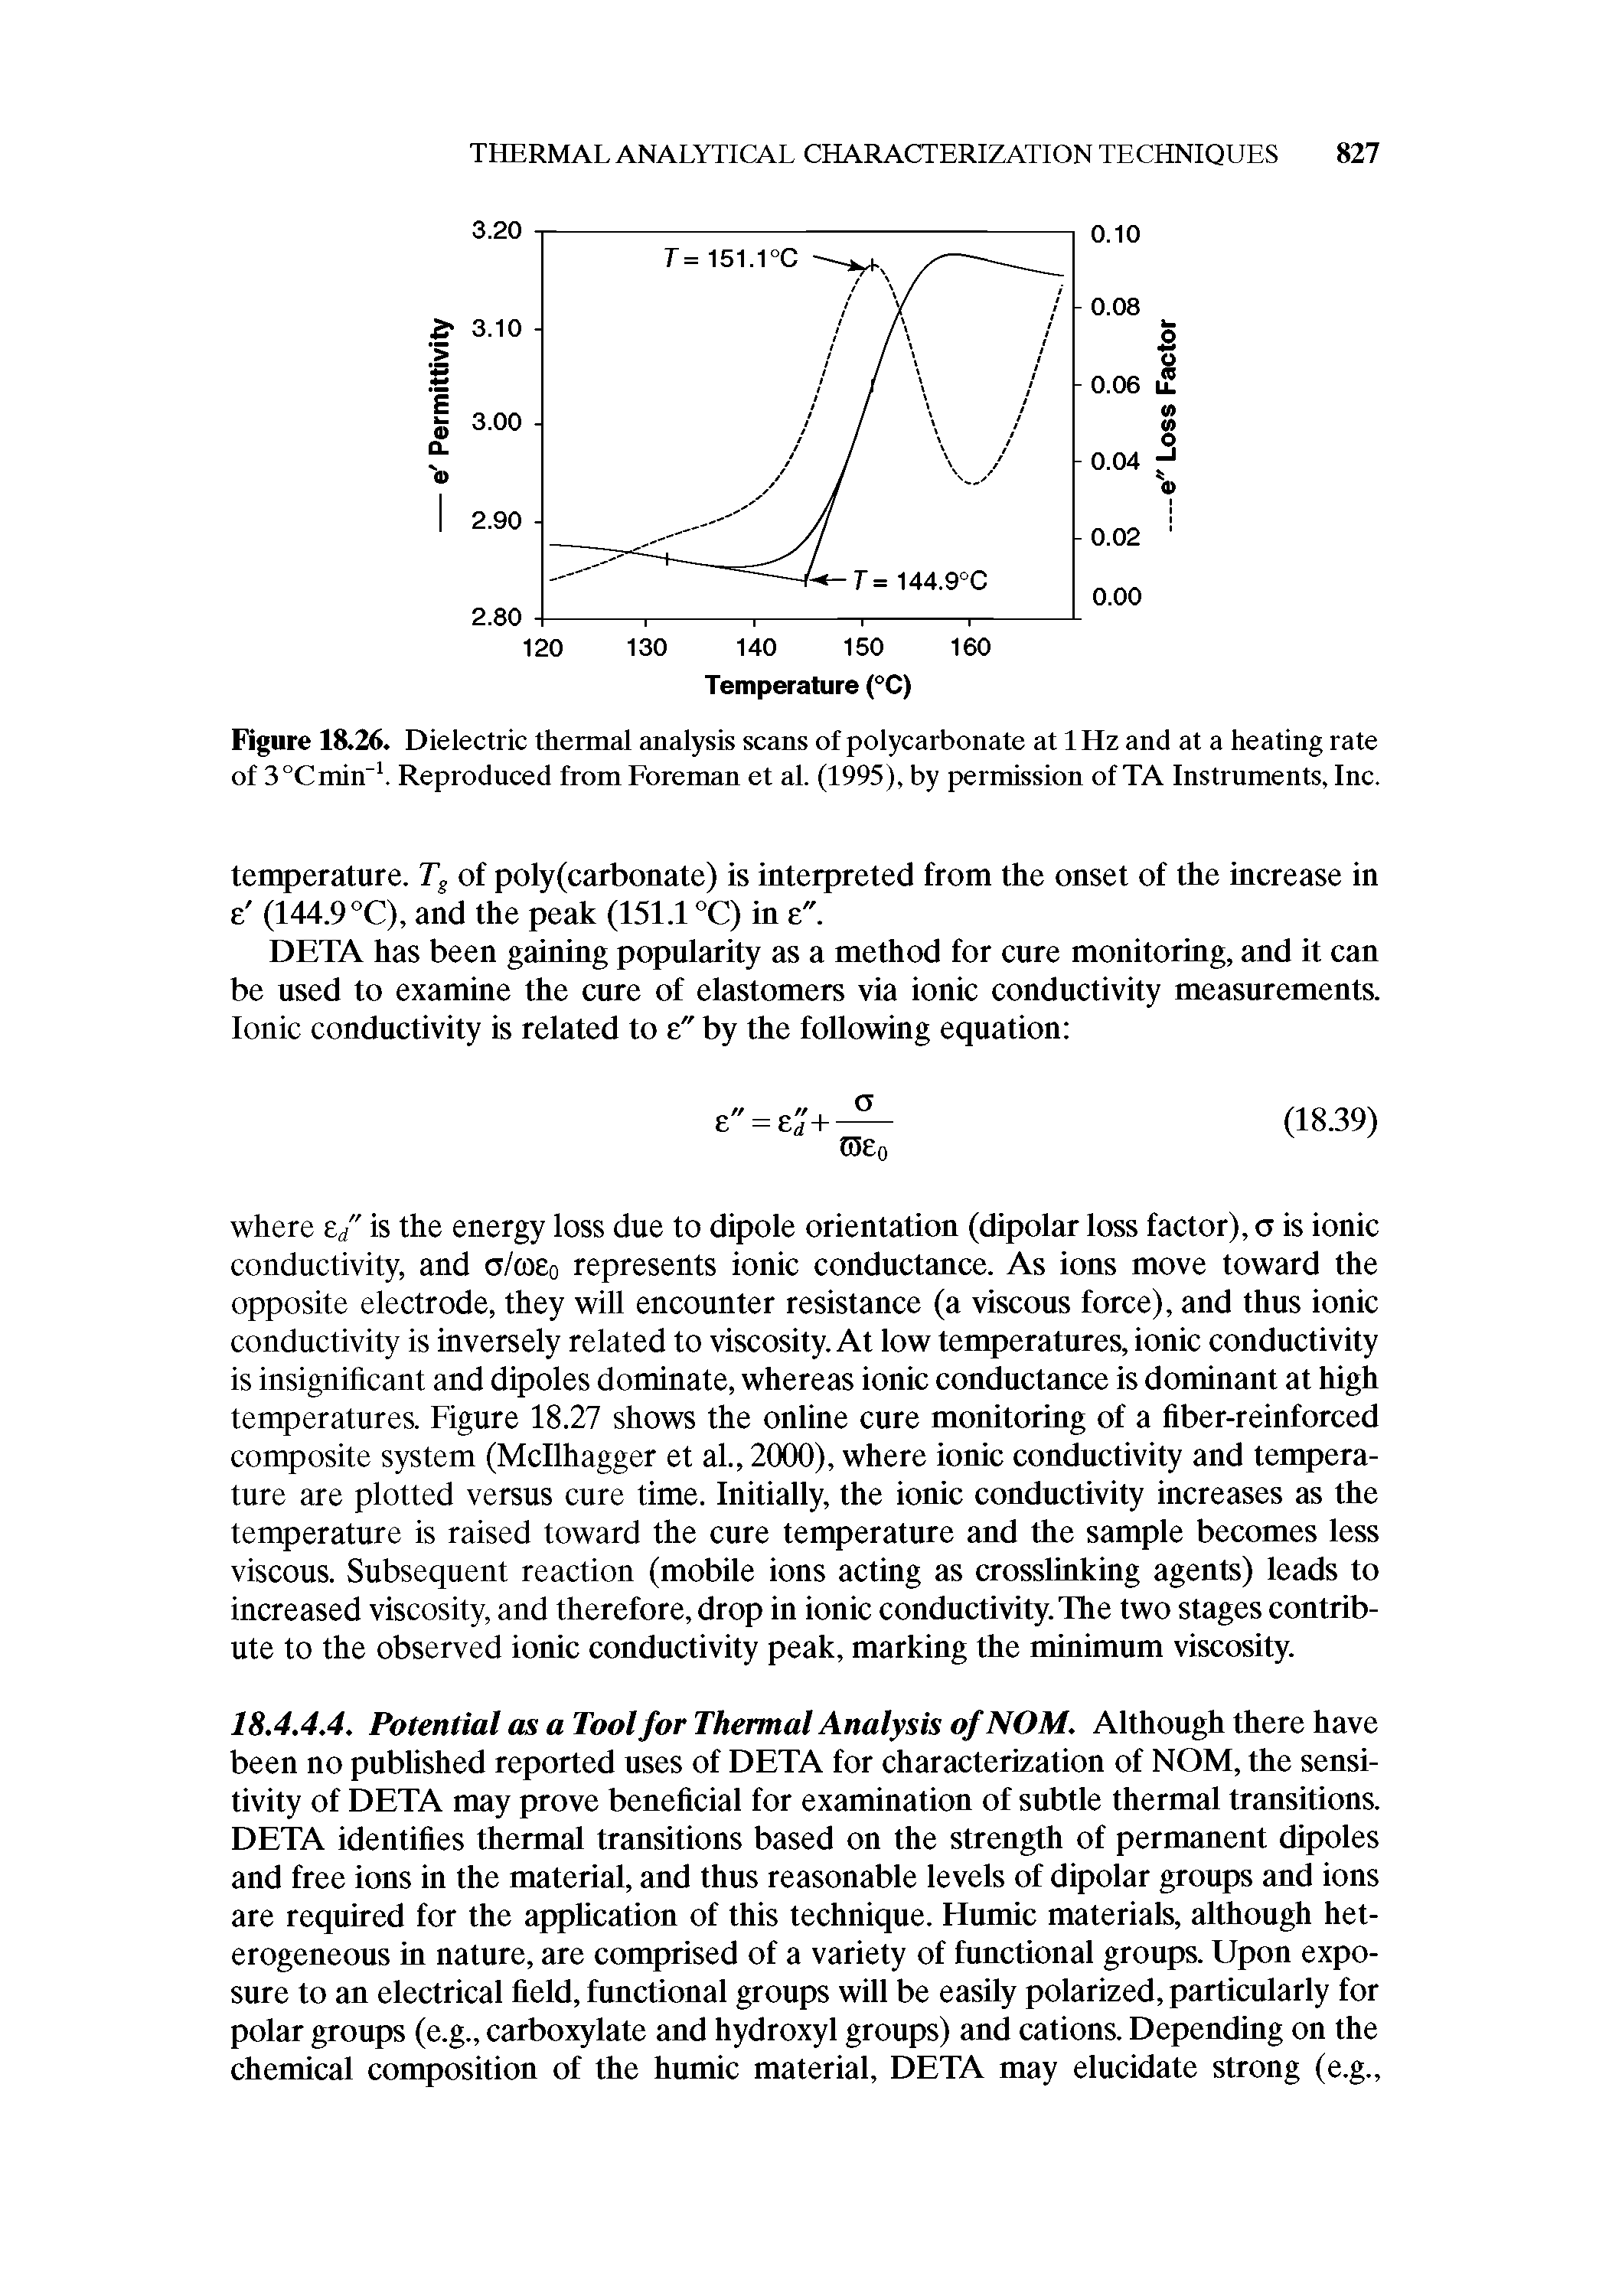 Figure 18.26. Dielectric thermal analysis scans of polycarbonate at 1Hz and at a heating rate of 3°Cmin 1. Reproduced from Foreman et al. (1995), by permission of TA Instruments, Inc.